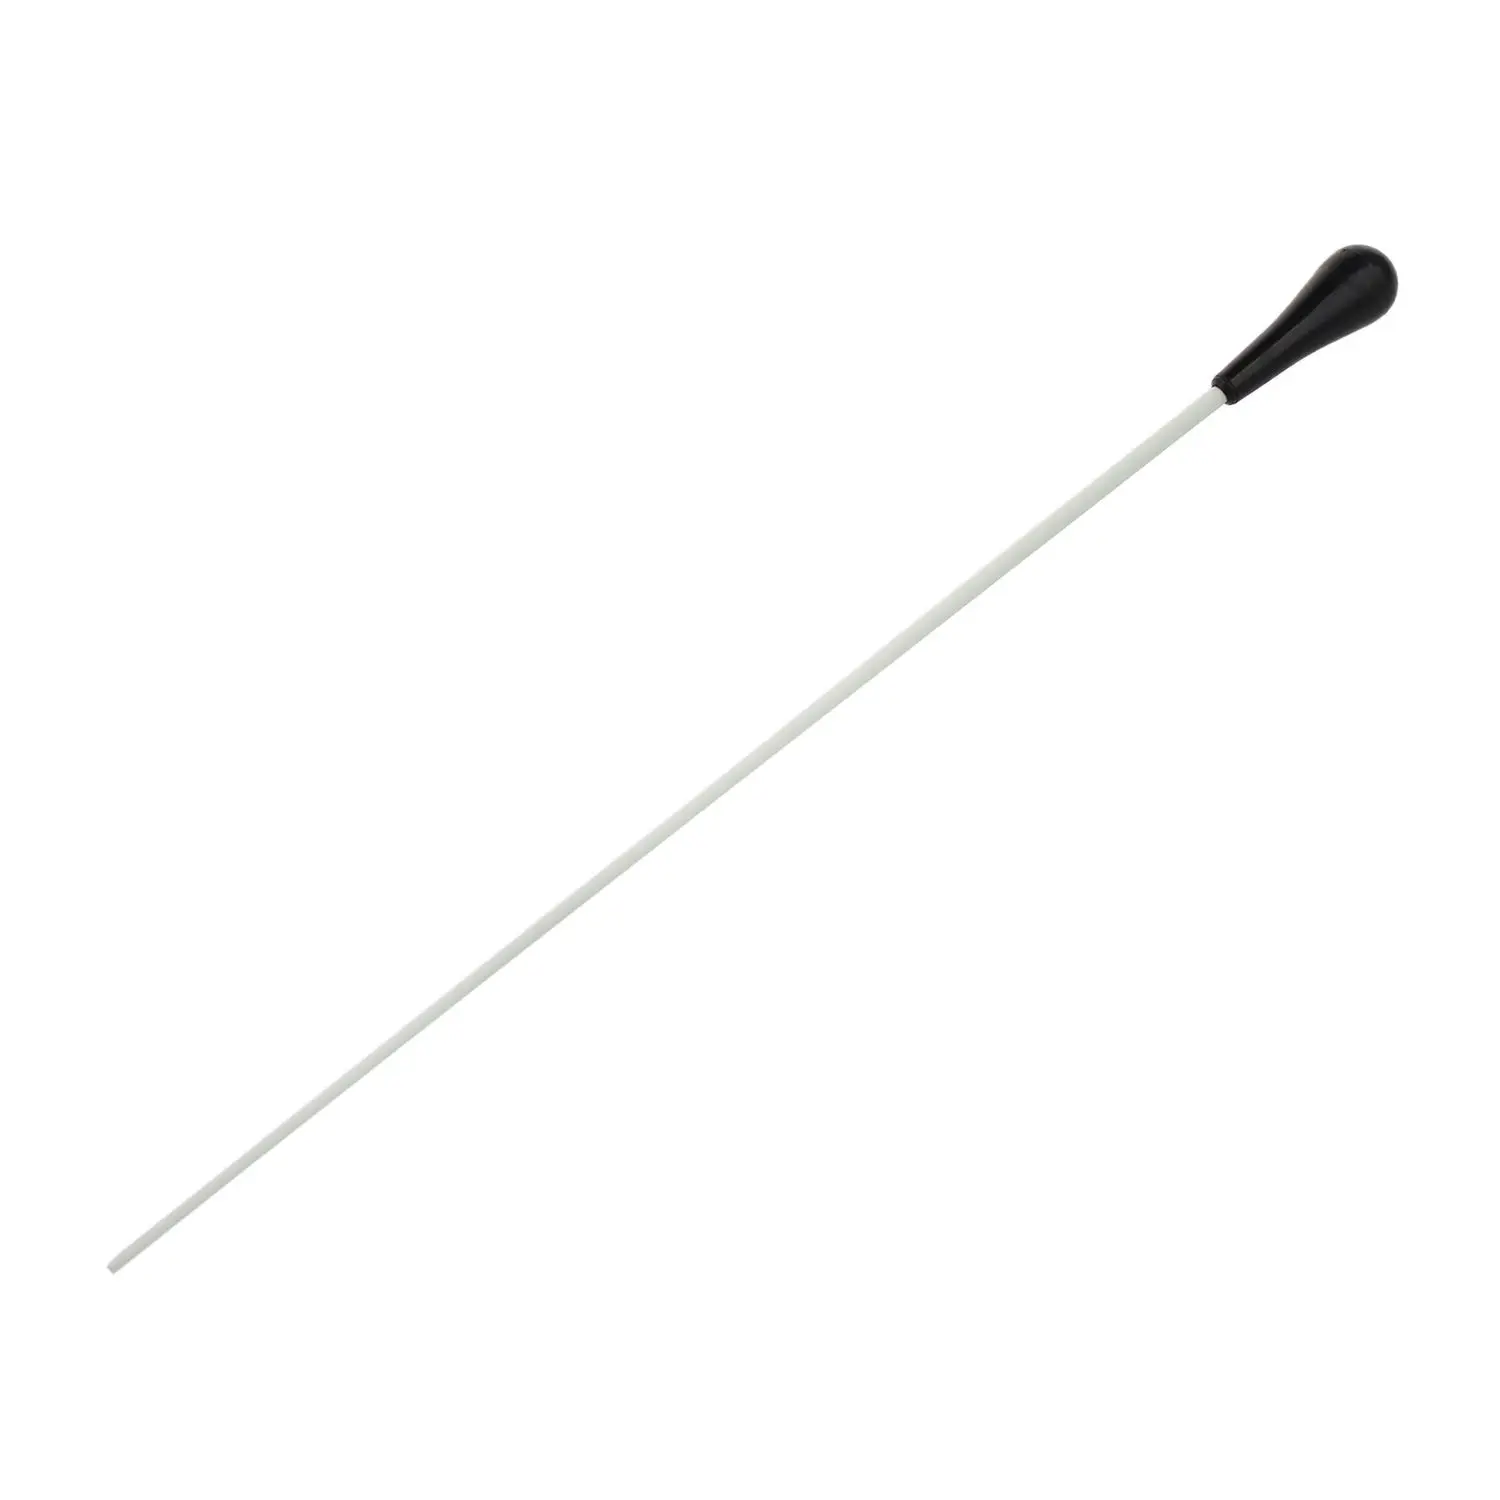 

New Black ABS Handle Musical Music Conductor Baton Gift White 15inch